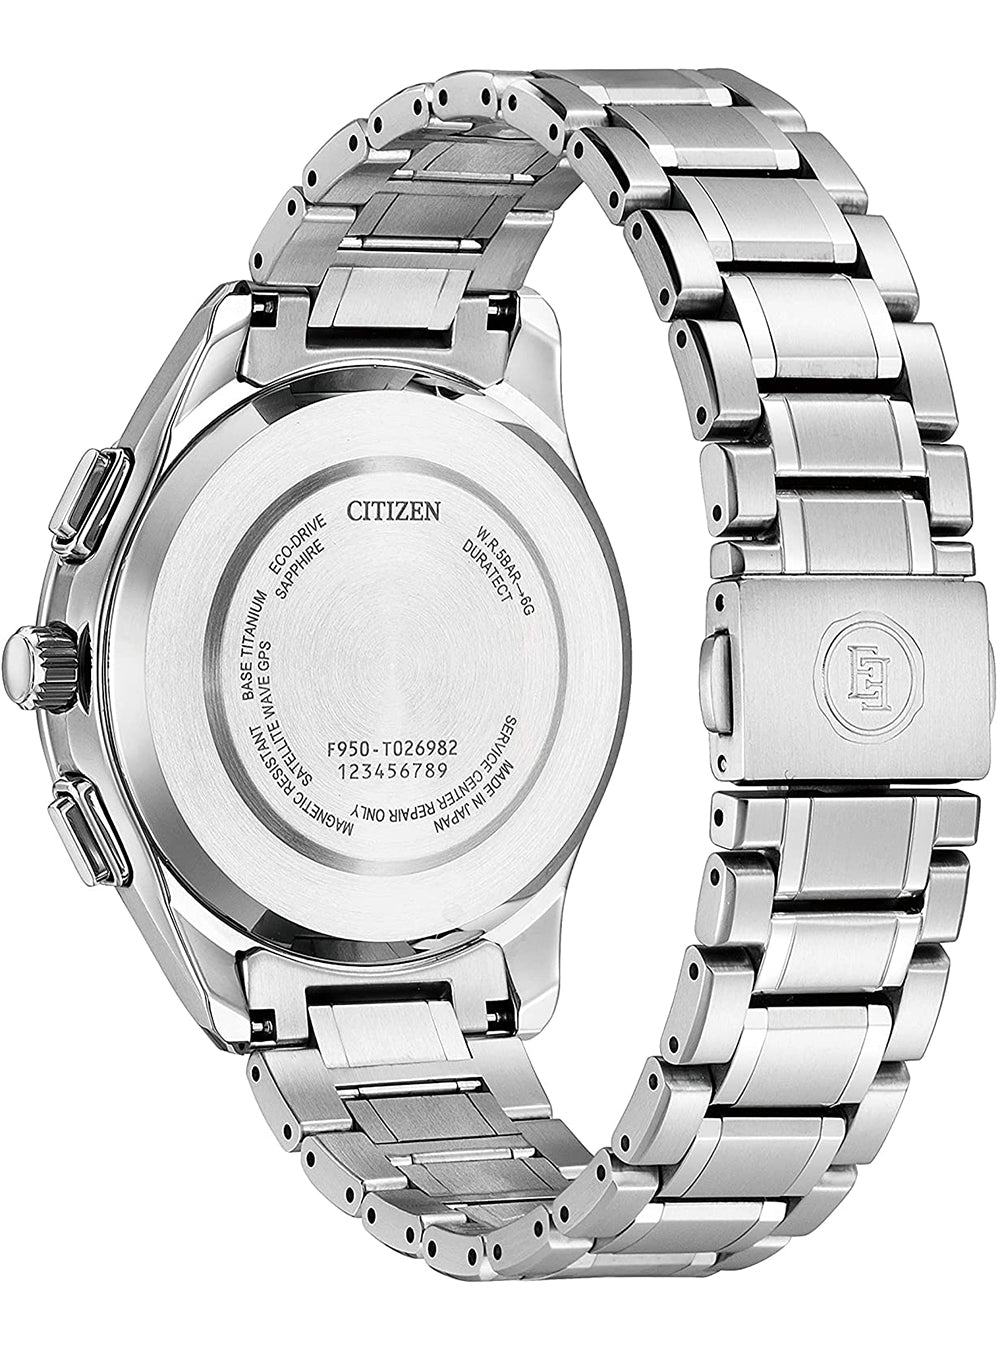 CITIZEN EXCEED CITIZEN YELL COLLECTION ECO-DRIVE CC4030-58L MADE IN JAPAN  LIMITED 600 JDM